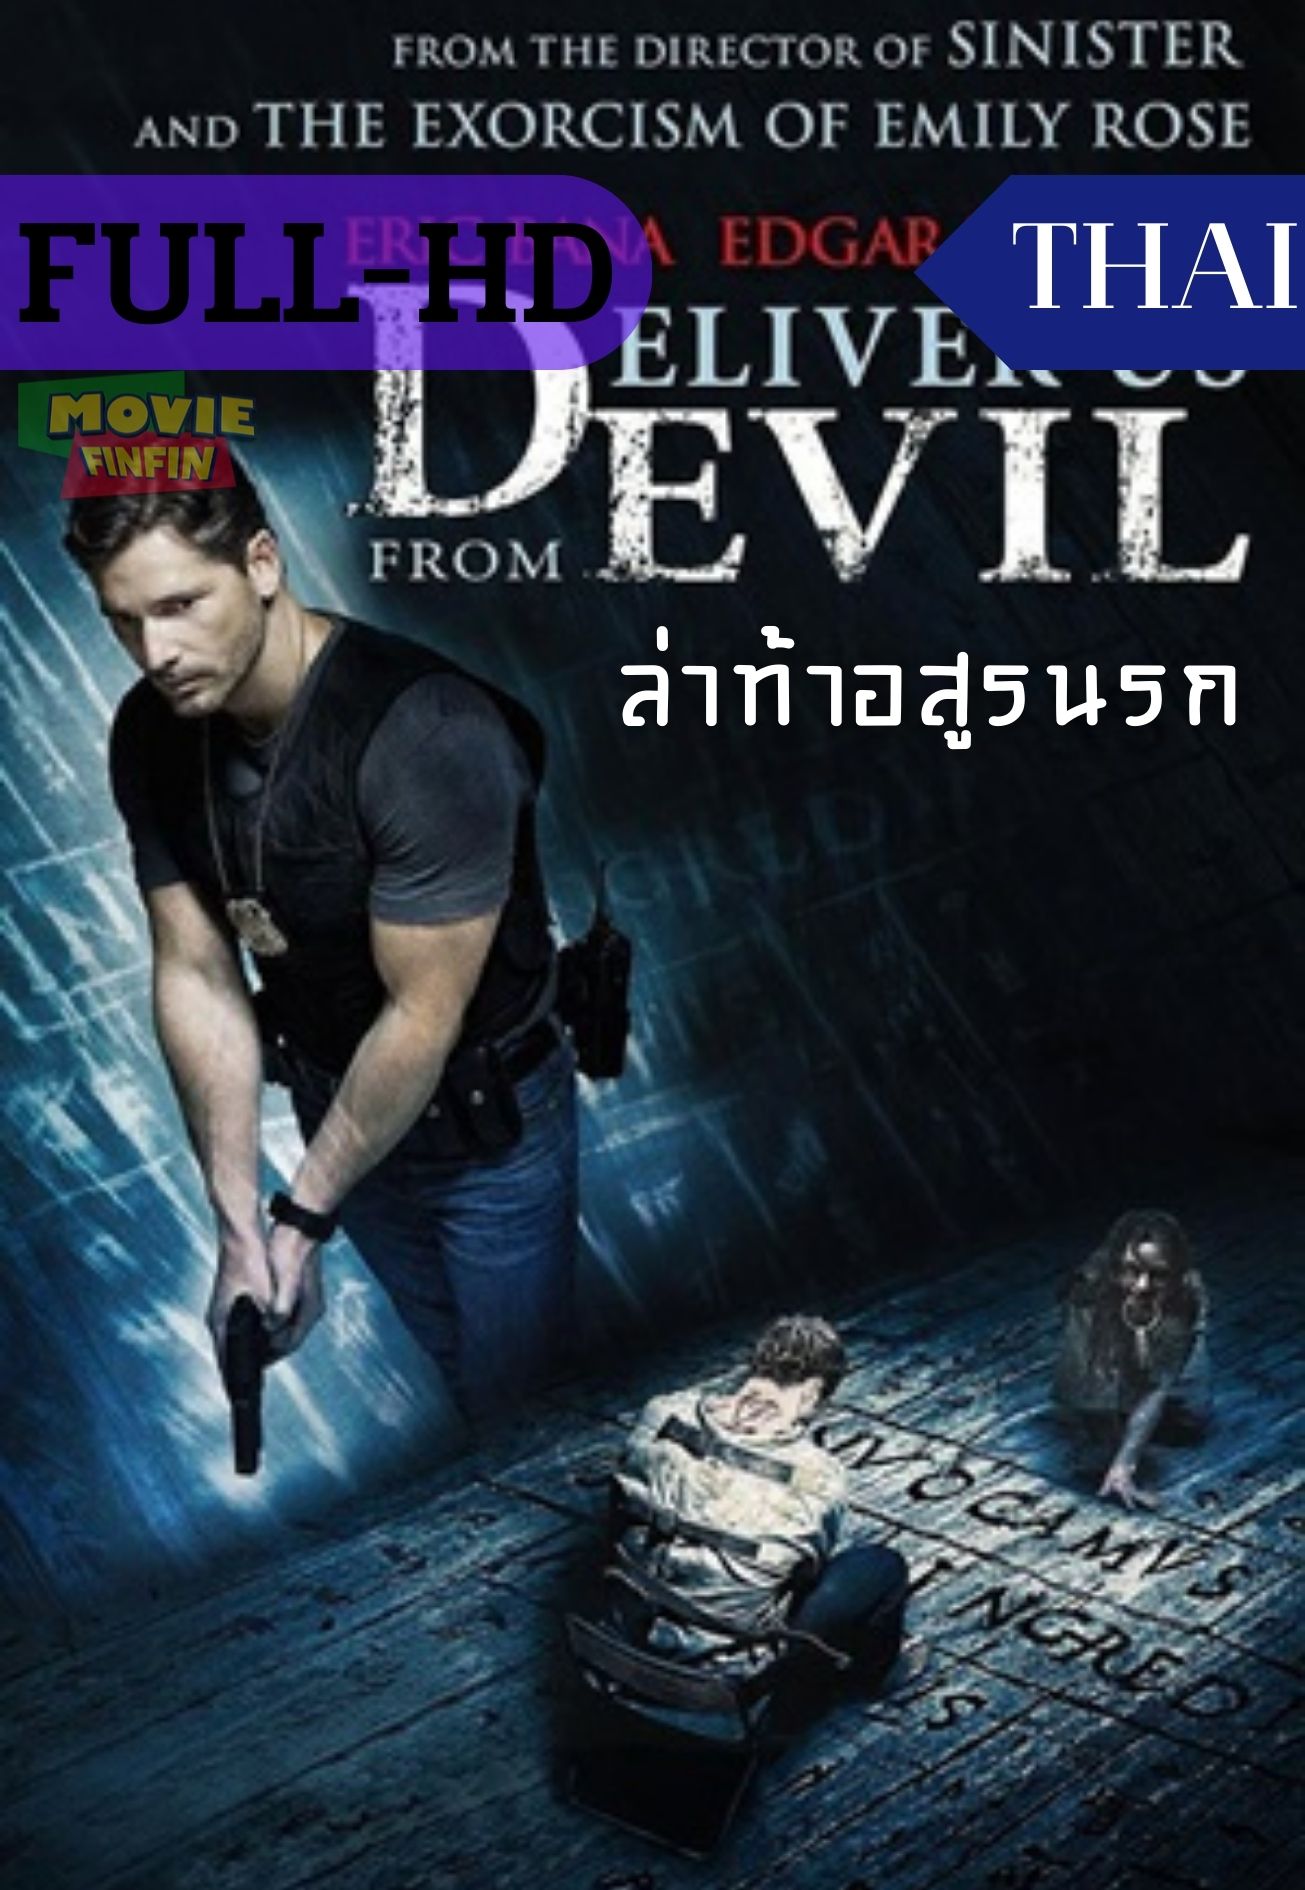 Deliver Us from Evil (2014) ล่าท้าอสูรนรก 